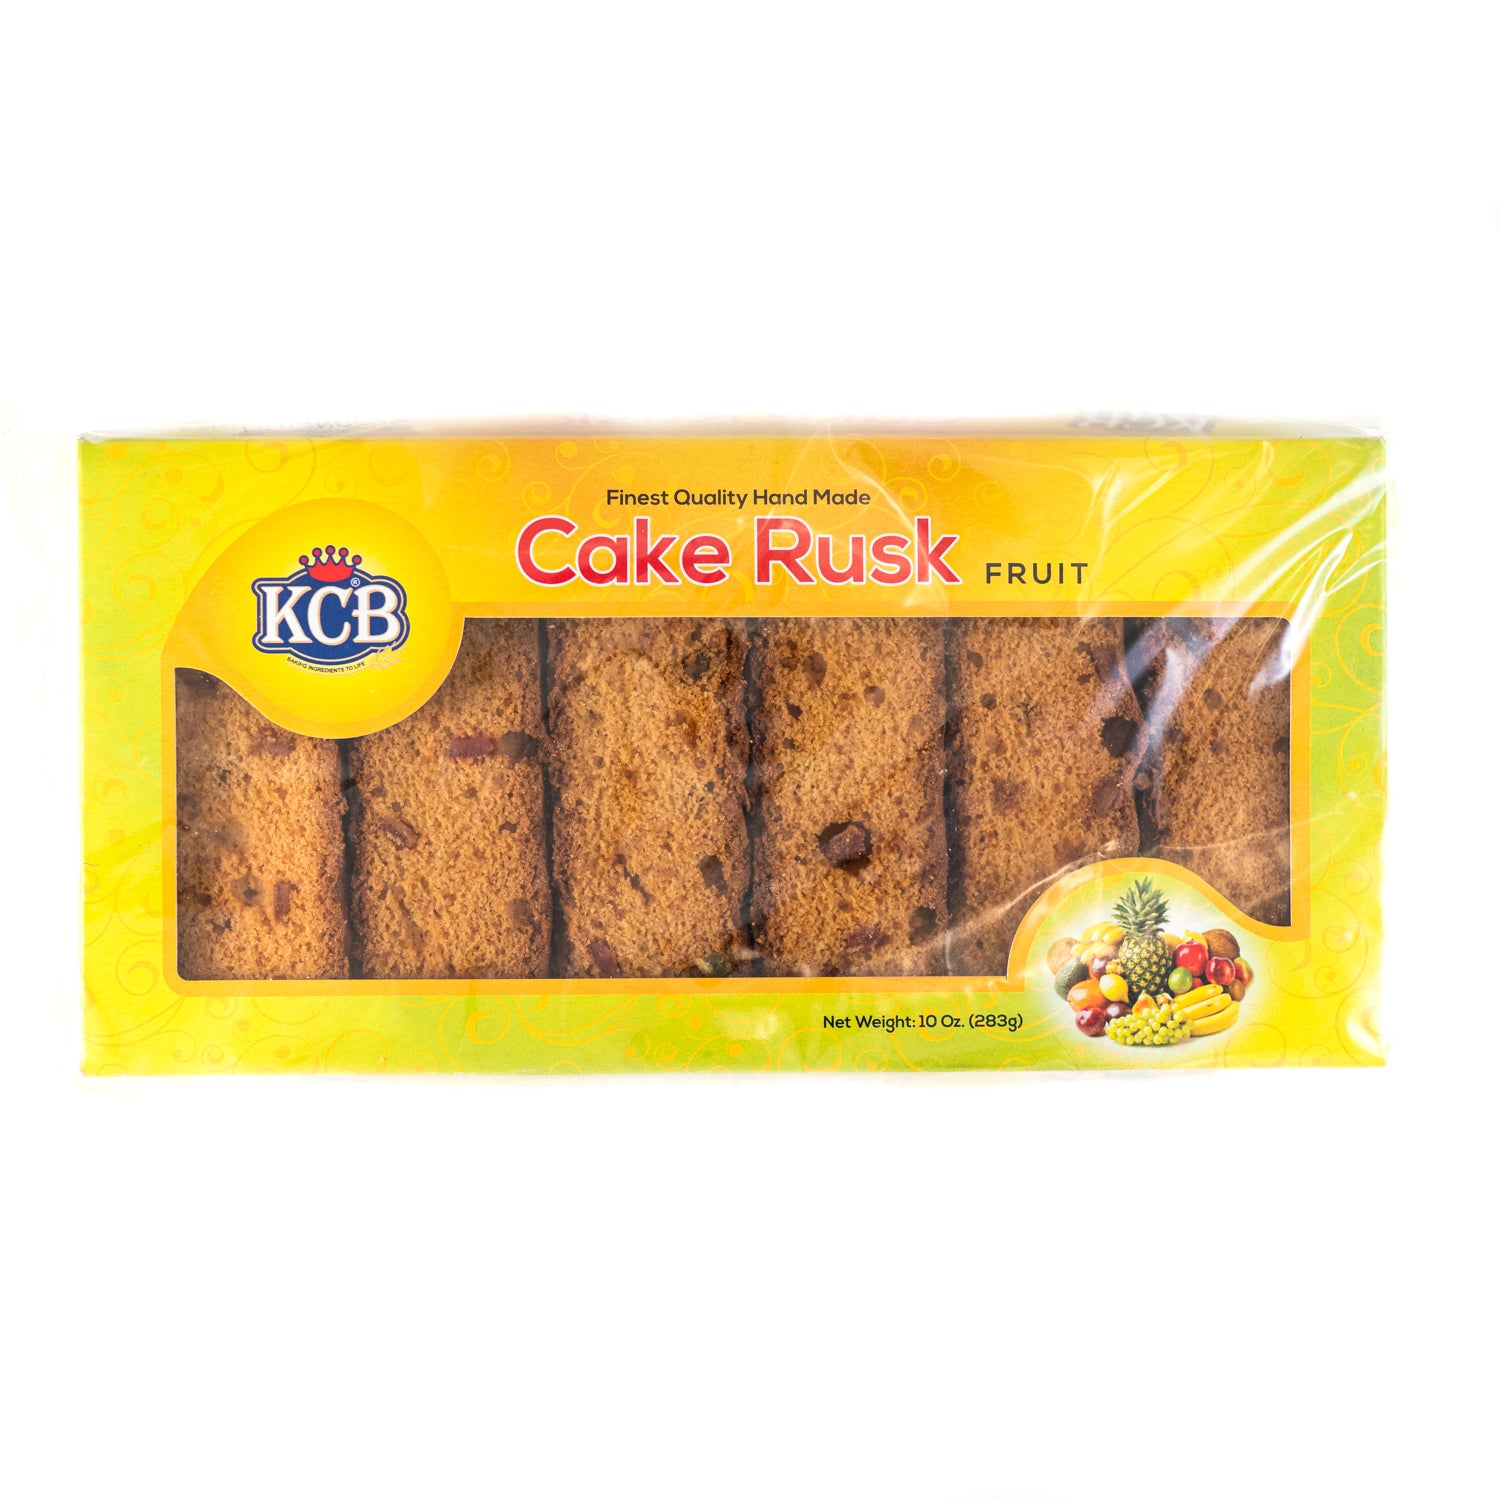 Krispy Cake Rusk avalaible for home delivery. - GoMothers.IN